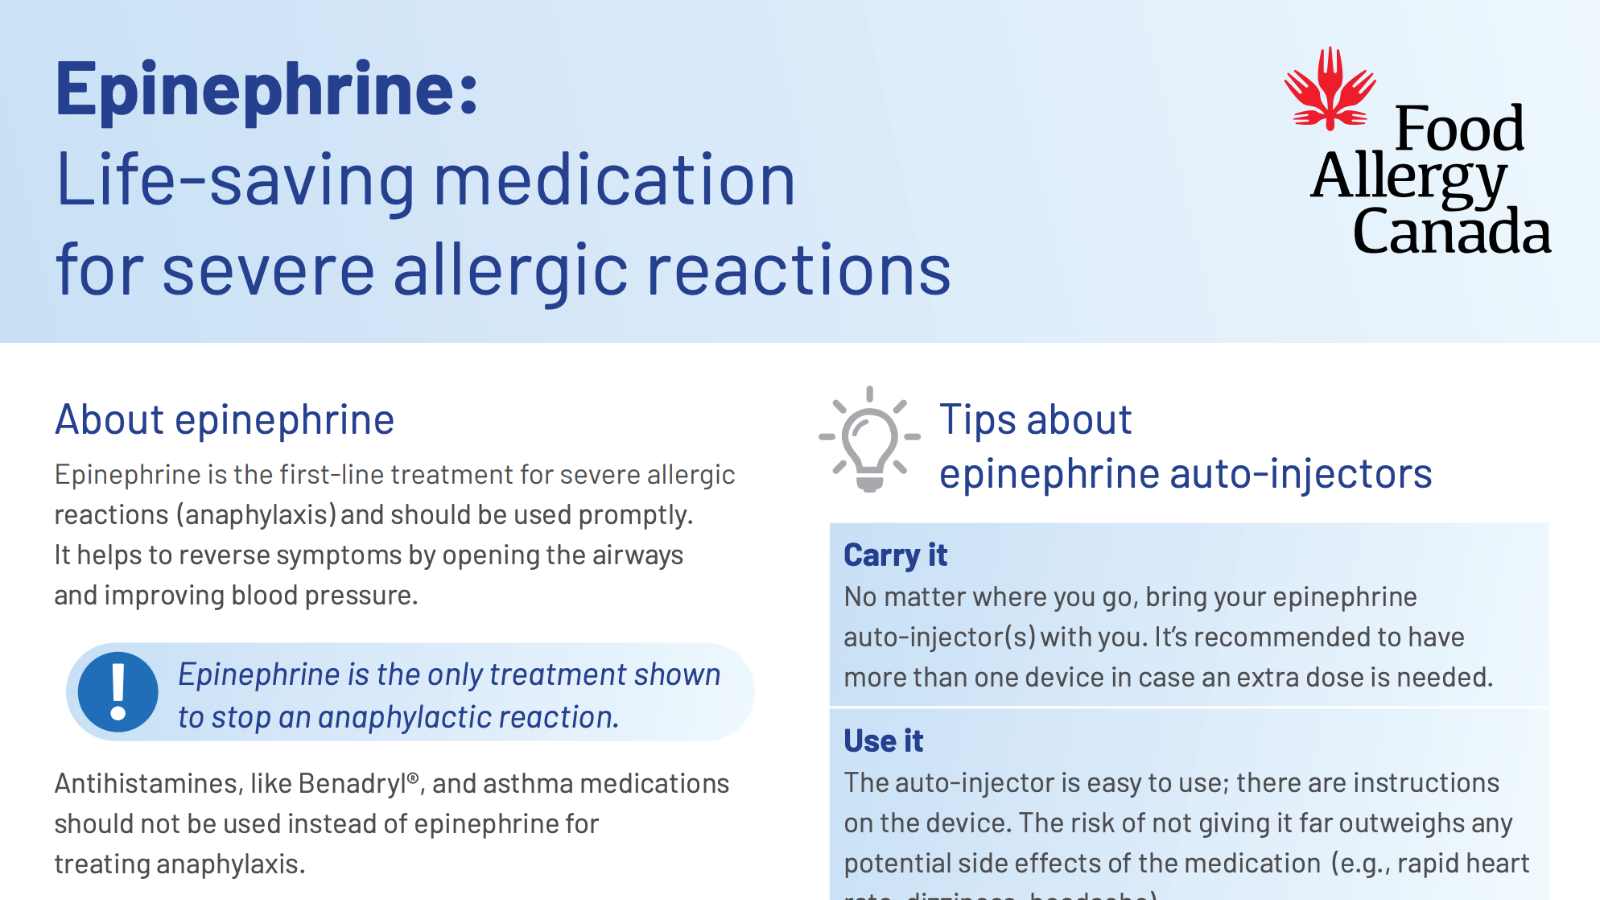 Mythbuster – Can Antihistamines Treat Anaphylaxis If Given As Soon As A  Reaction Happens? - Food Allergy Canada